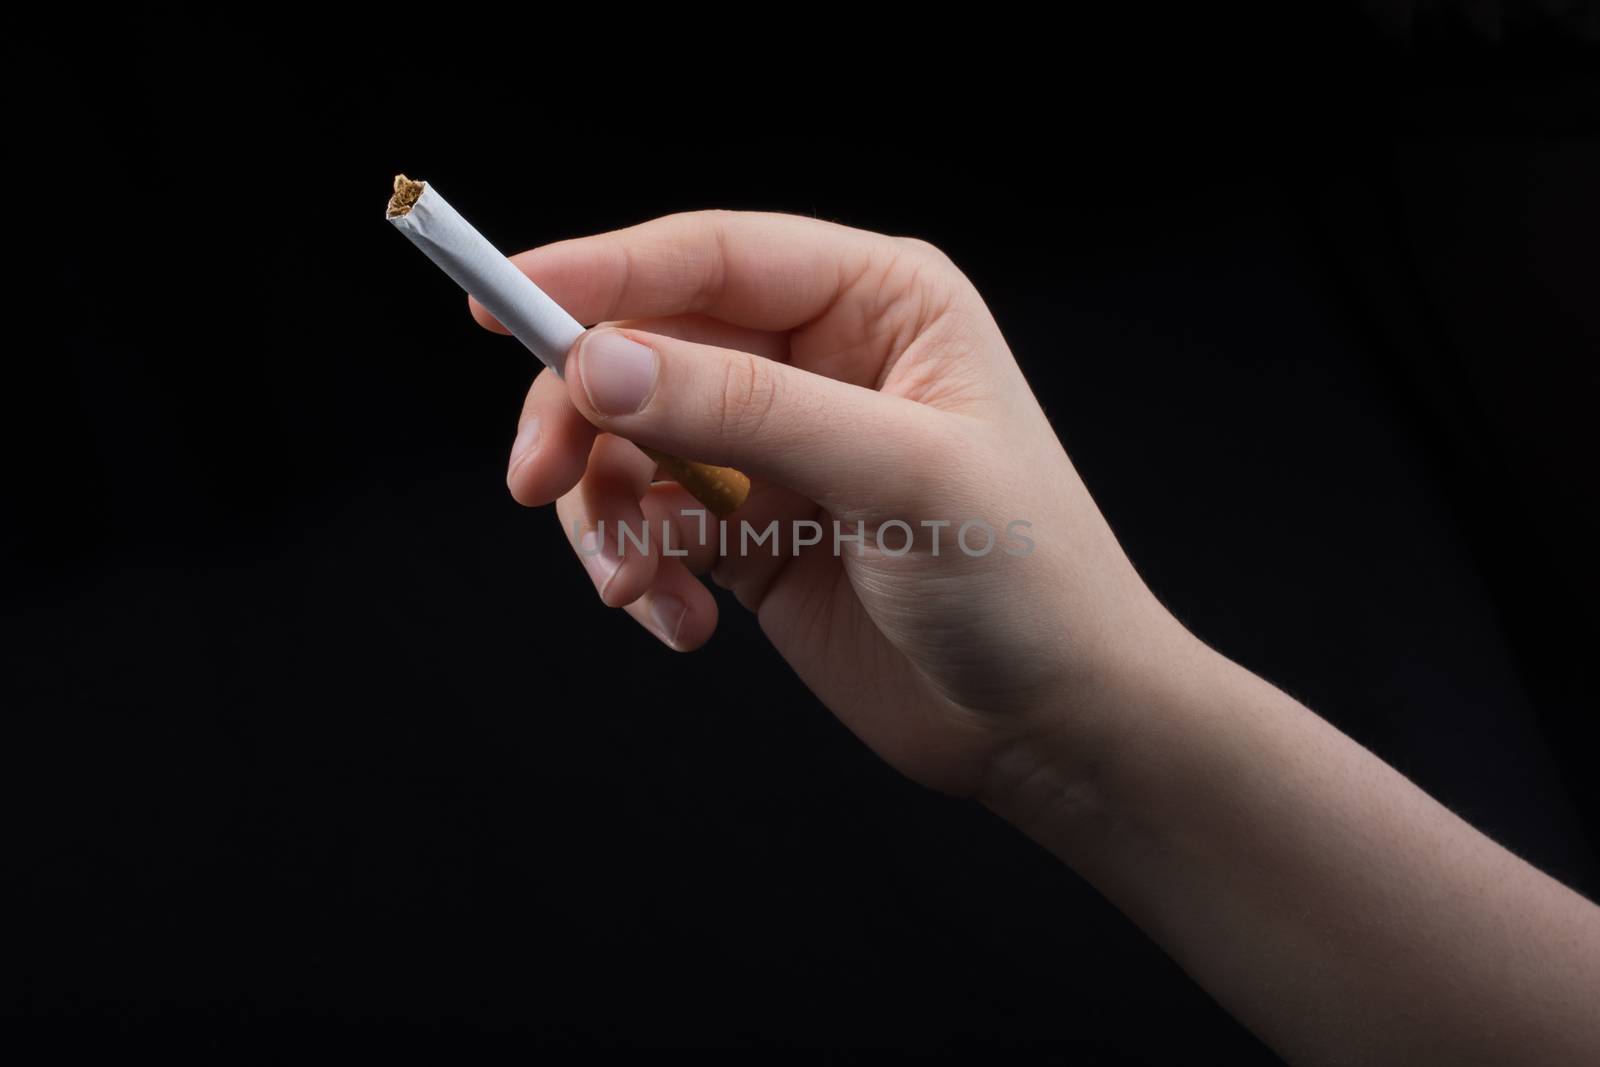 Hand is holding a cigarette on black background